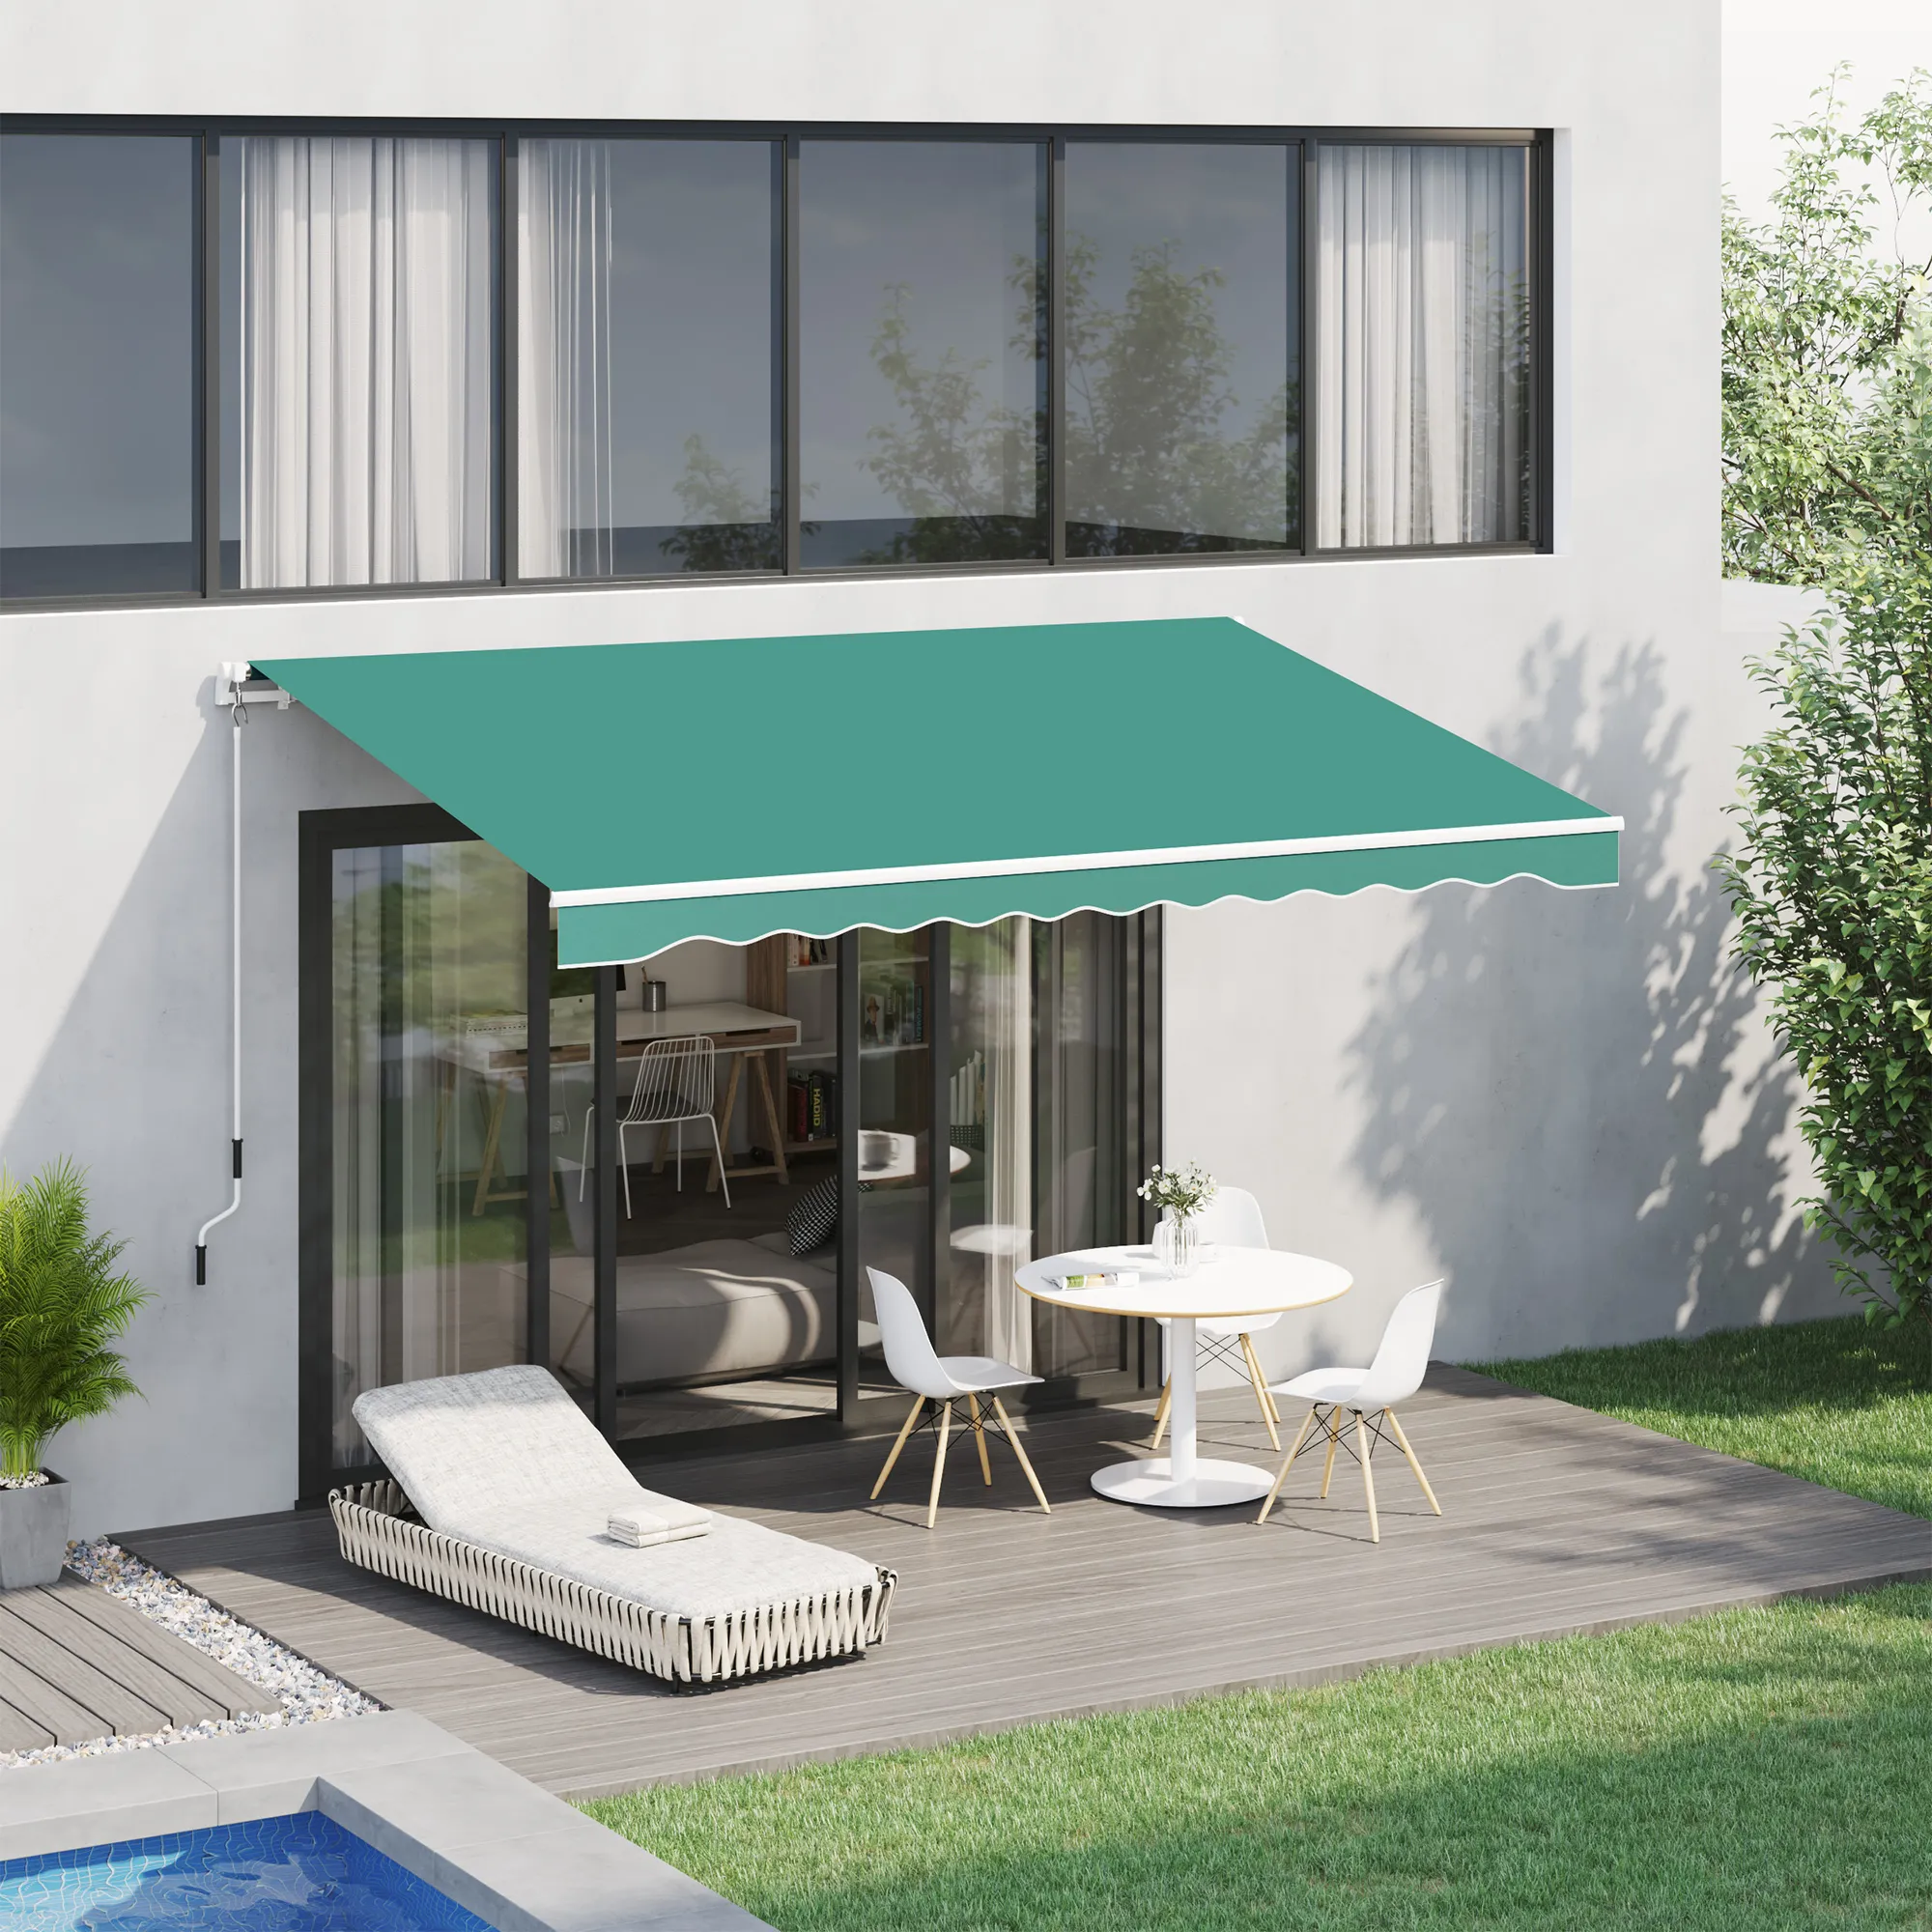 Outsunny 13' x 8' Retractable Awning, Patio Awnings, Sunshade Shelter w/ Manual Crank Handle, UV & Water-Resistant Fabric and Aluminum Frame for Deck, Balcony, Yard, Green